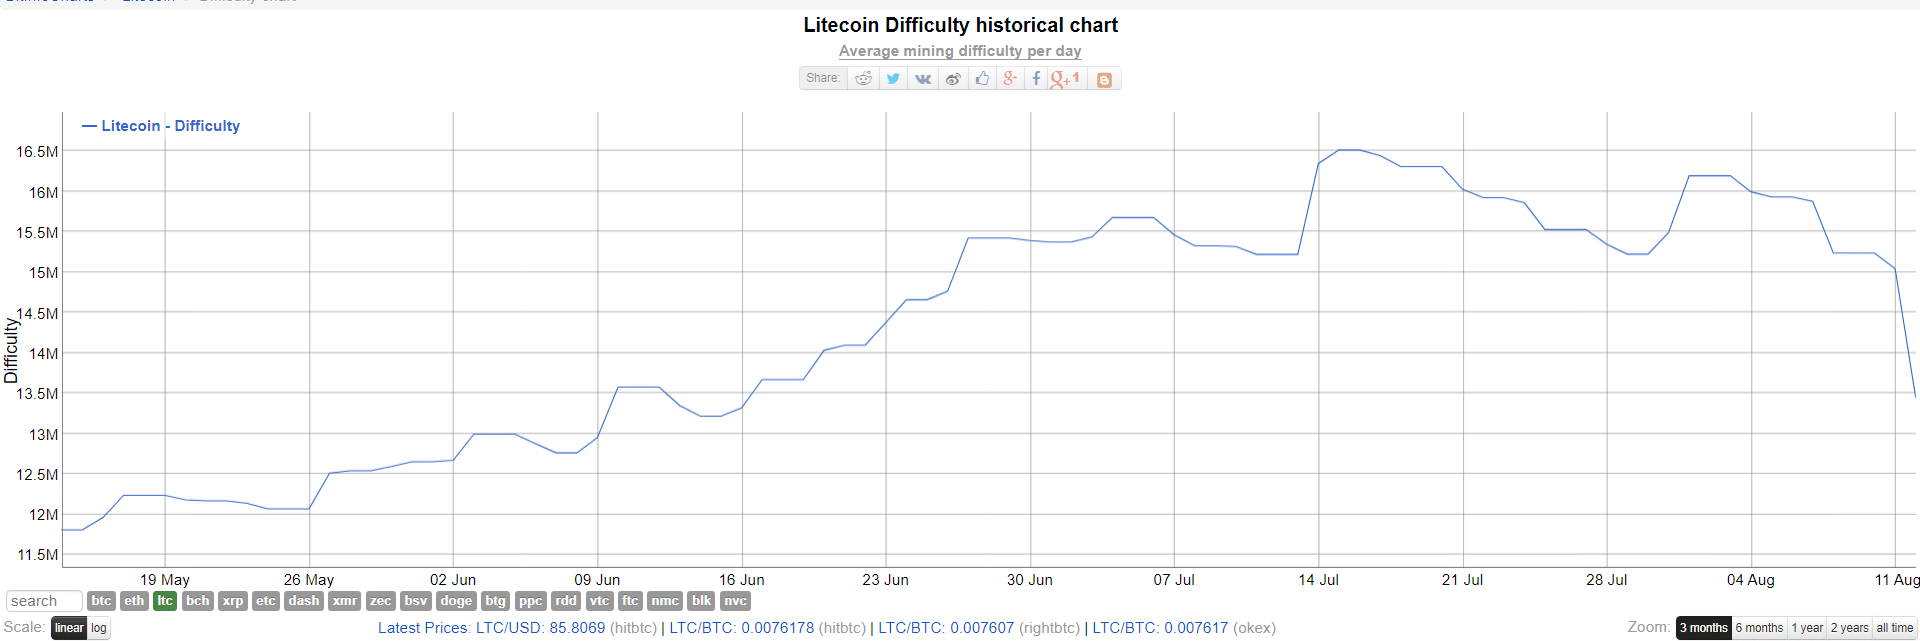 Litecoin Mining Difficulty Surge To New Levels As LTC Halving Approaches